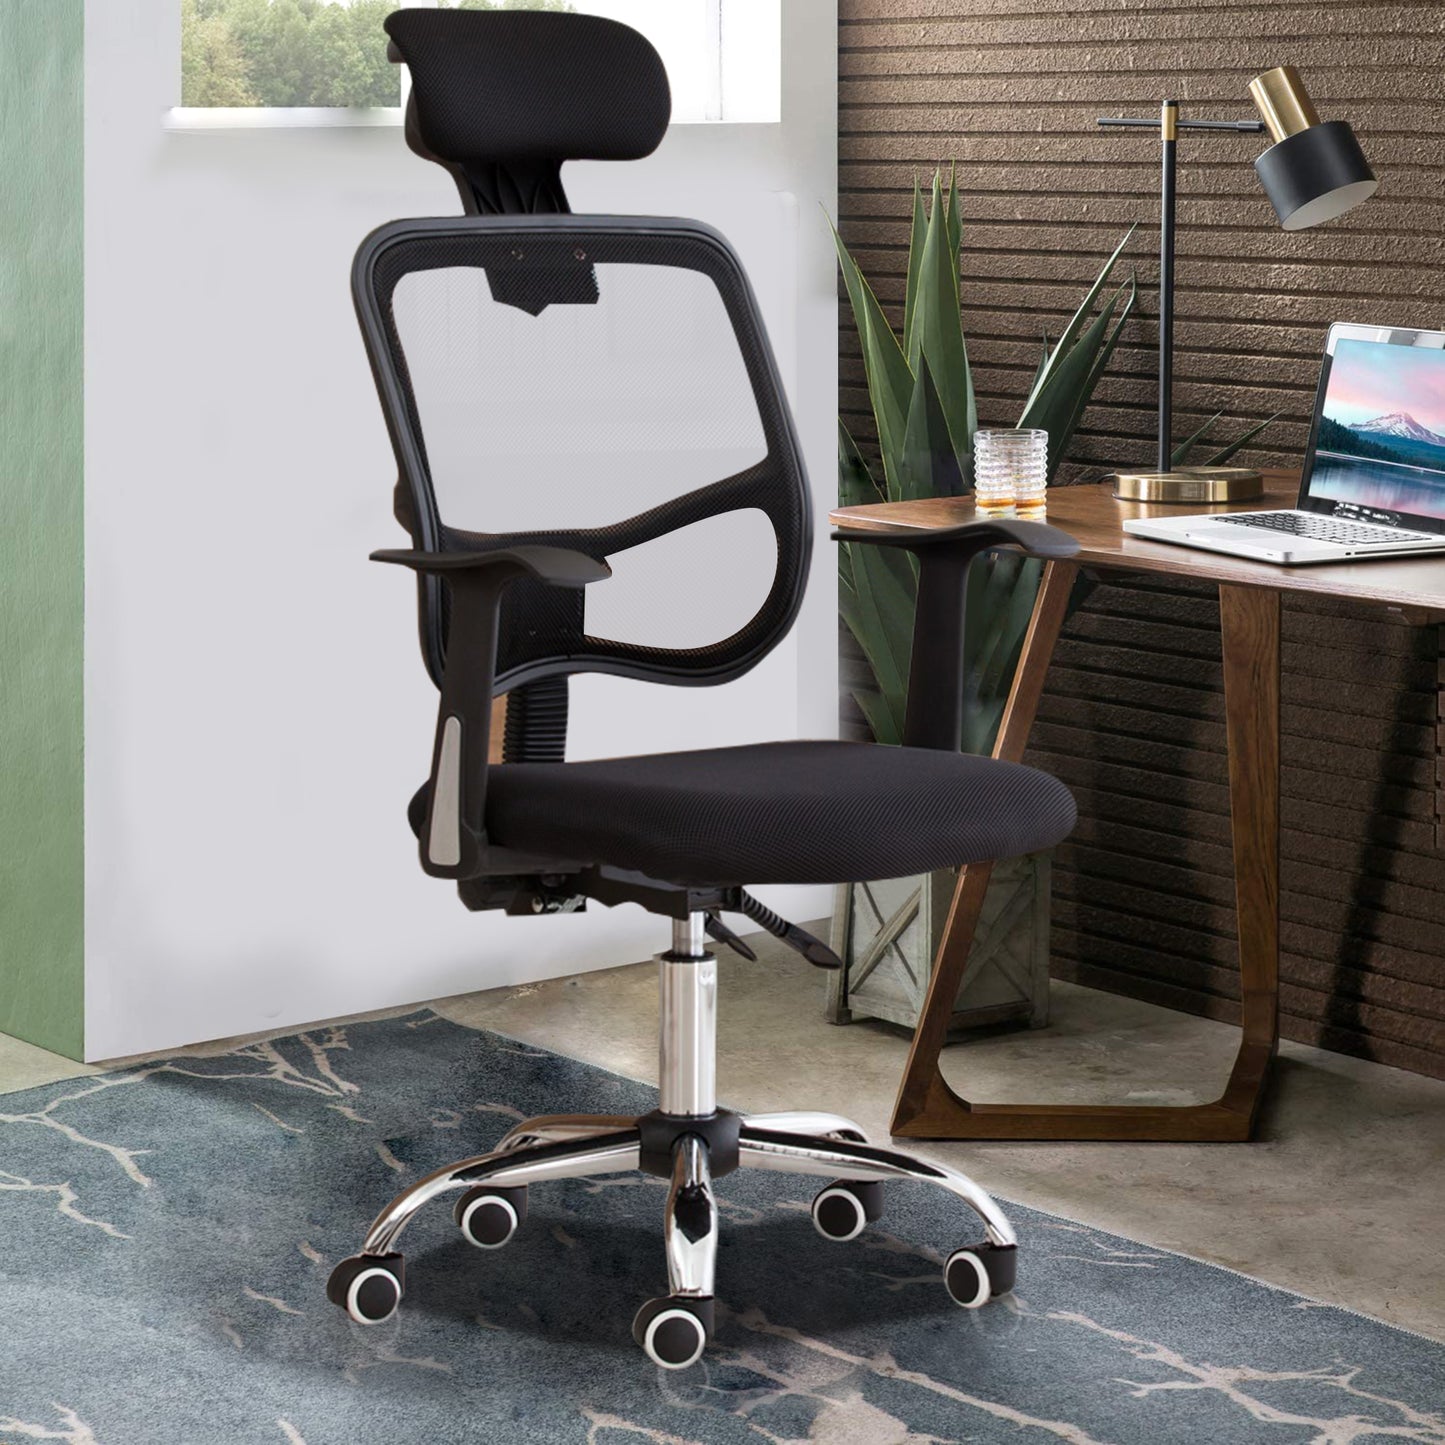 SYNGAR Office Desk Chair with Adjustable Height, Modern Arms Chair Office Chair Mid Back Mesh Fabric Swivel Computer Home Task Chairs Ergonomic Executive Chair with Armrests and Headrest, Black